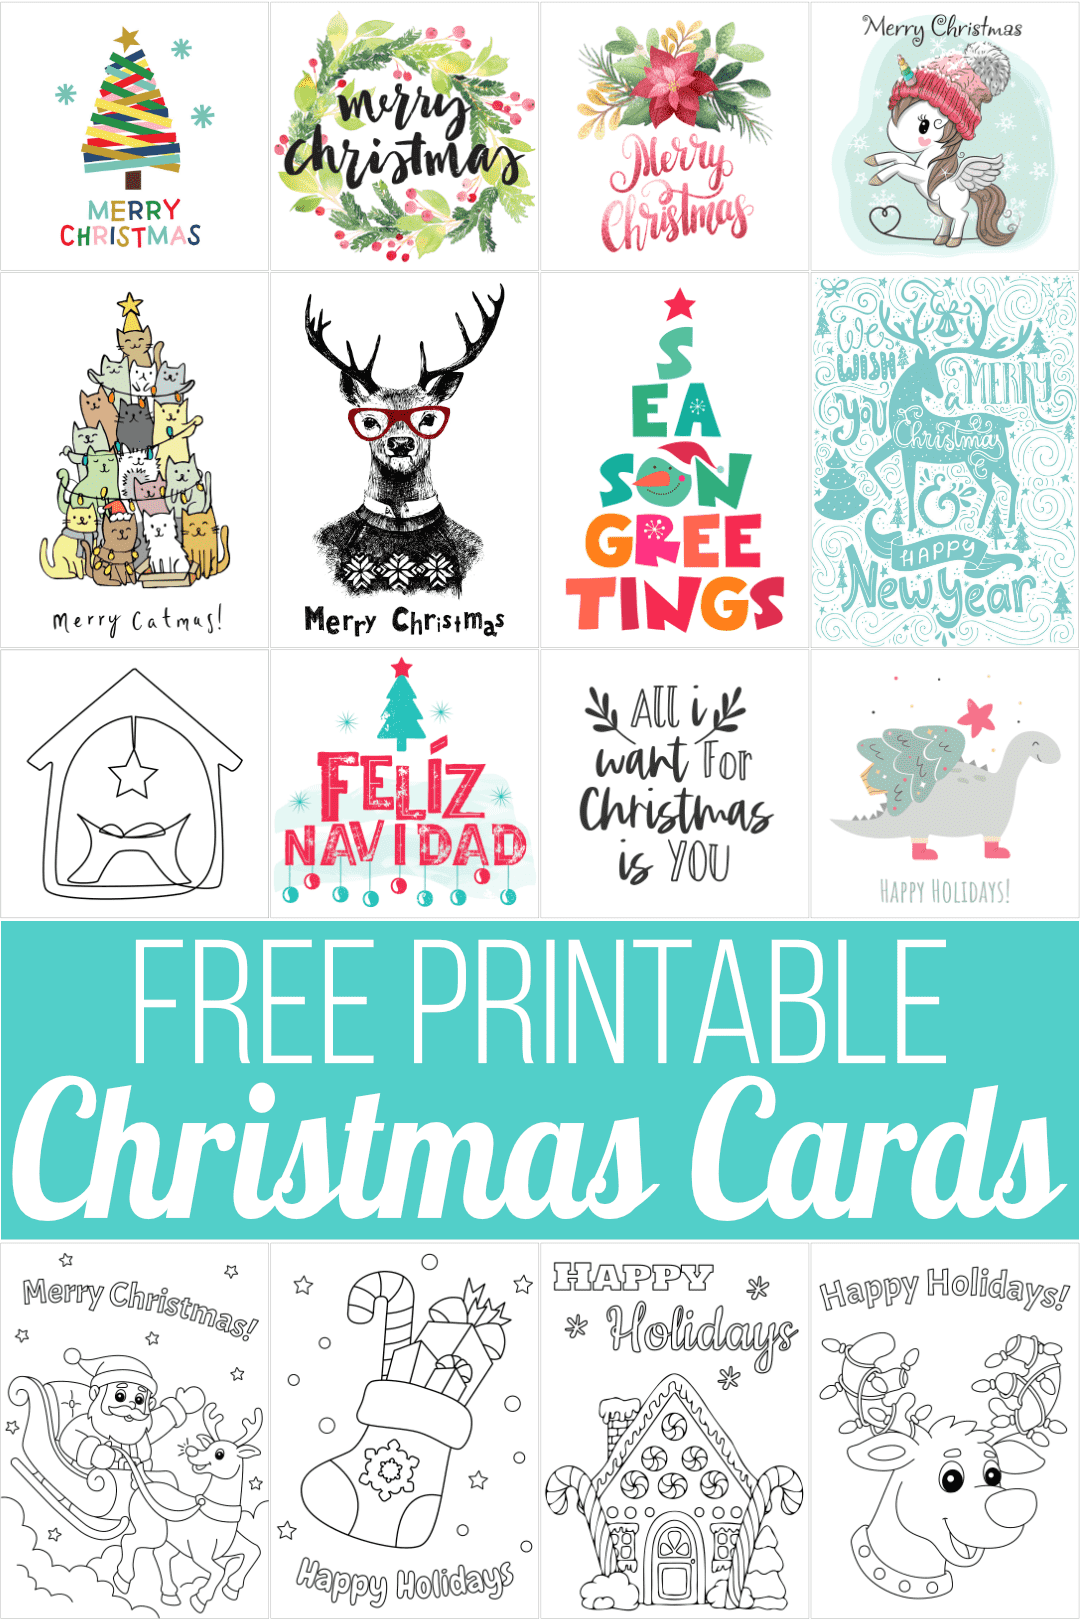 21 Free Printable Christmas Cards for 21 With Free Holiday Photo Card Templates